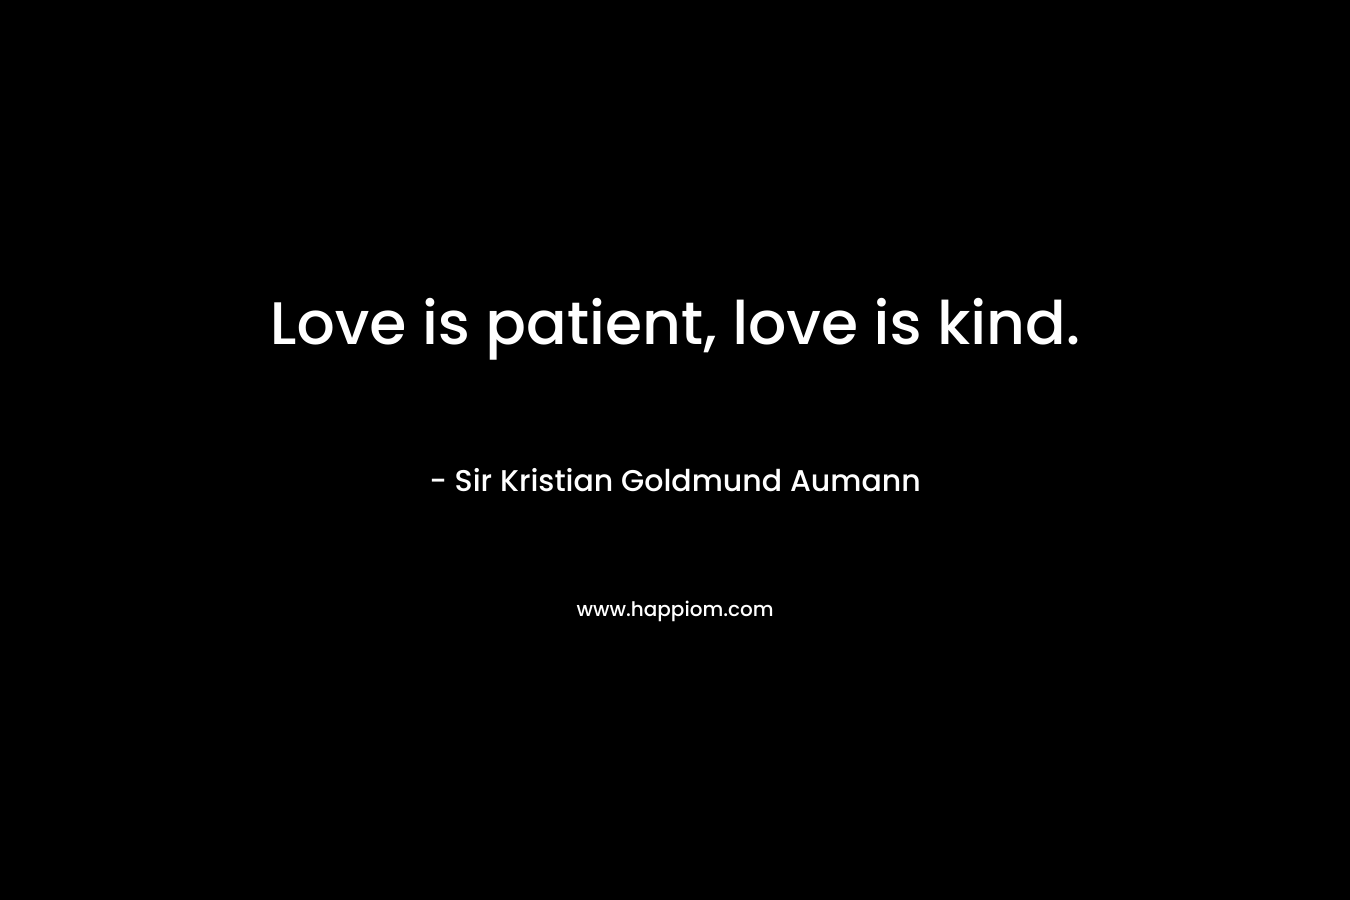 Love is patient, love is kind.